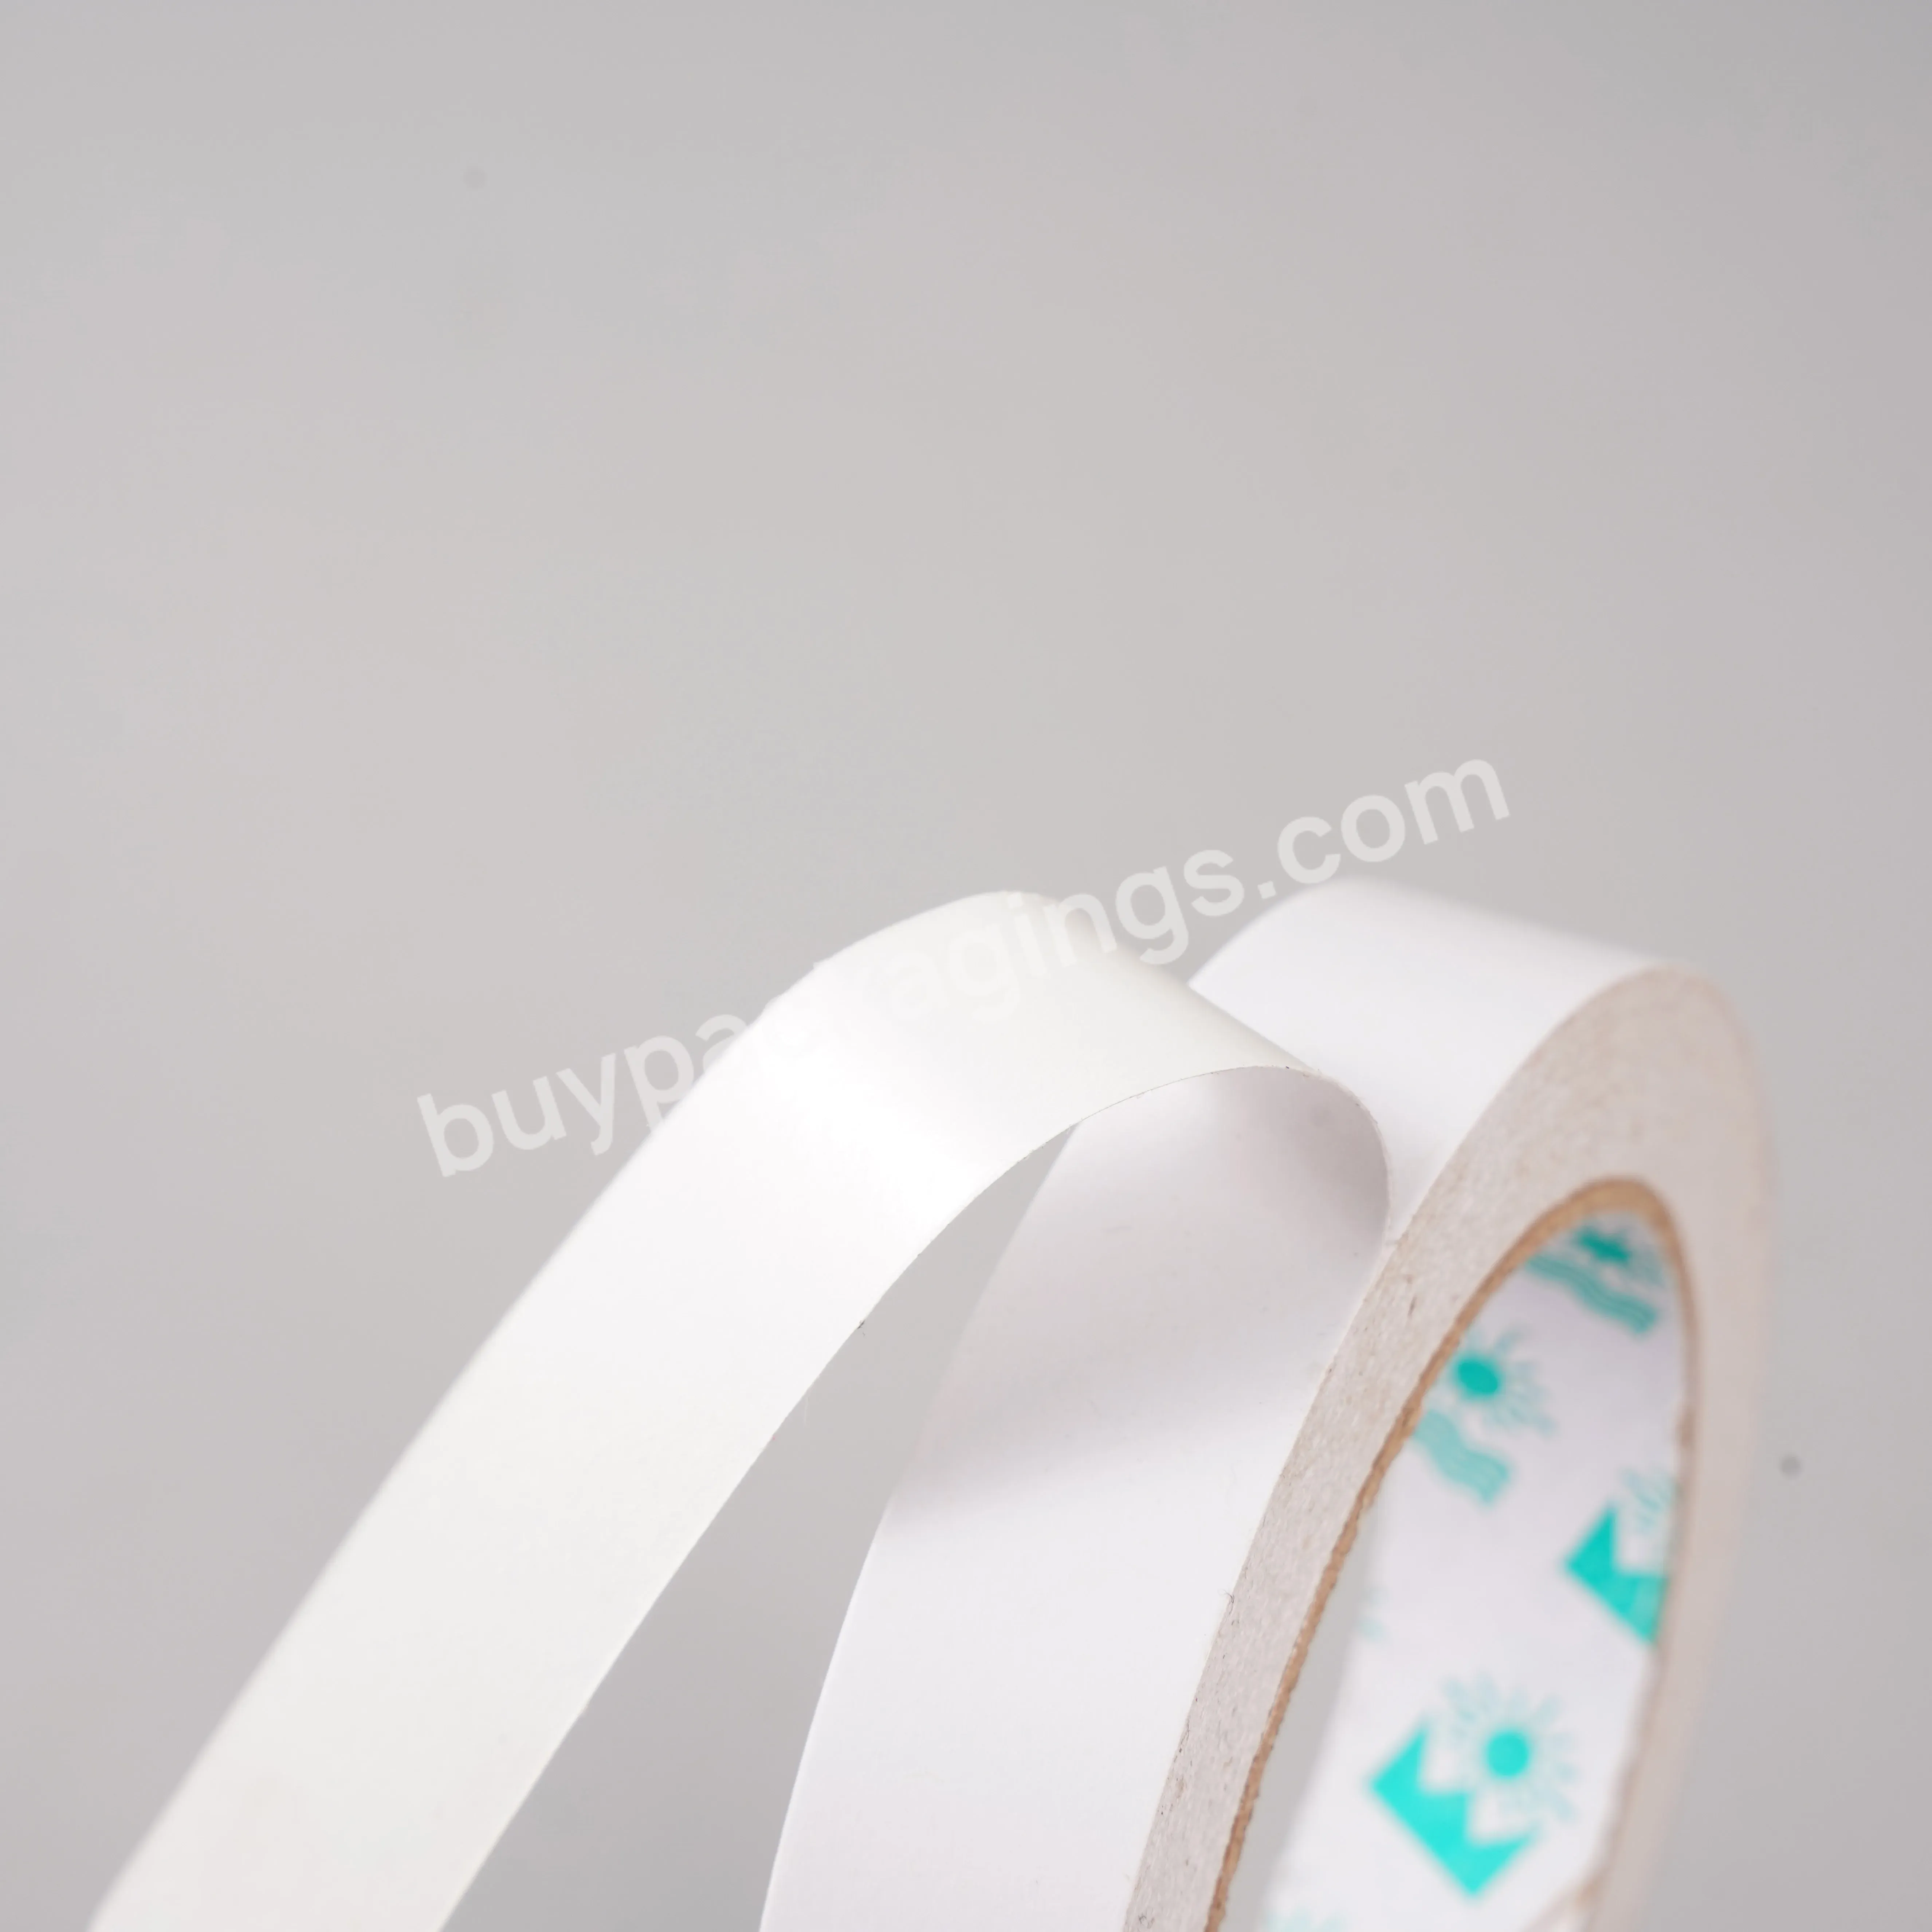 Fixed Transparent Learning Manual Stationery Office Tape White Double-sided Tape - Buy Double-sided Film Tape,Super Strong Sticky Woodworking Tape,Transparent Adhesive Thin Film.